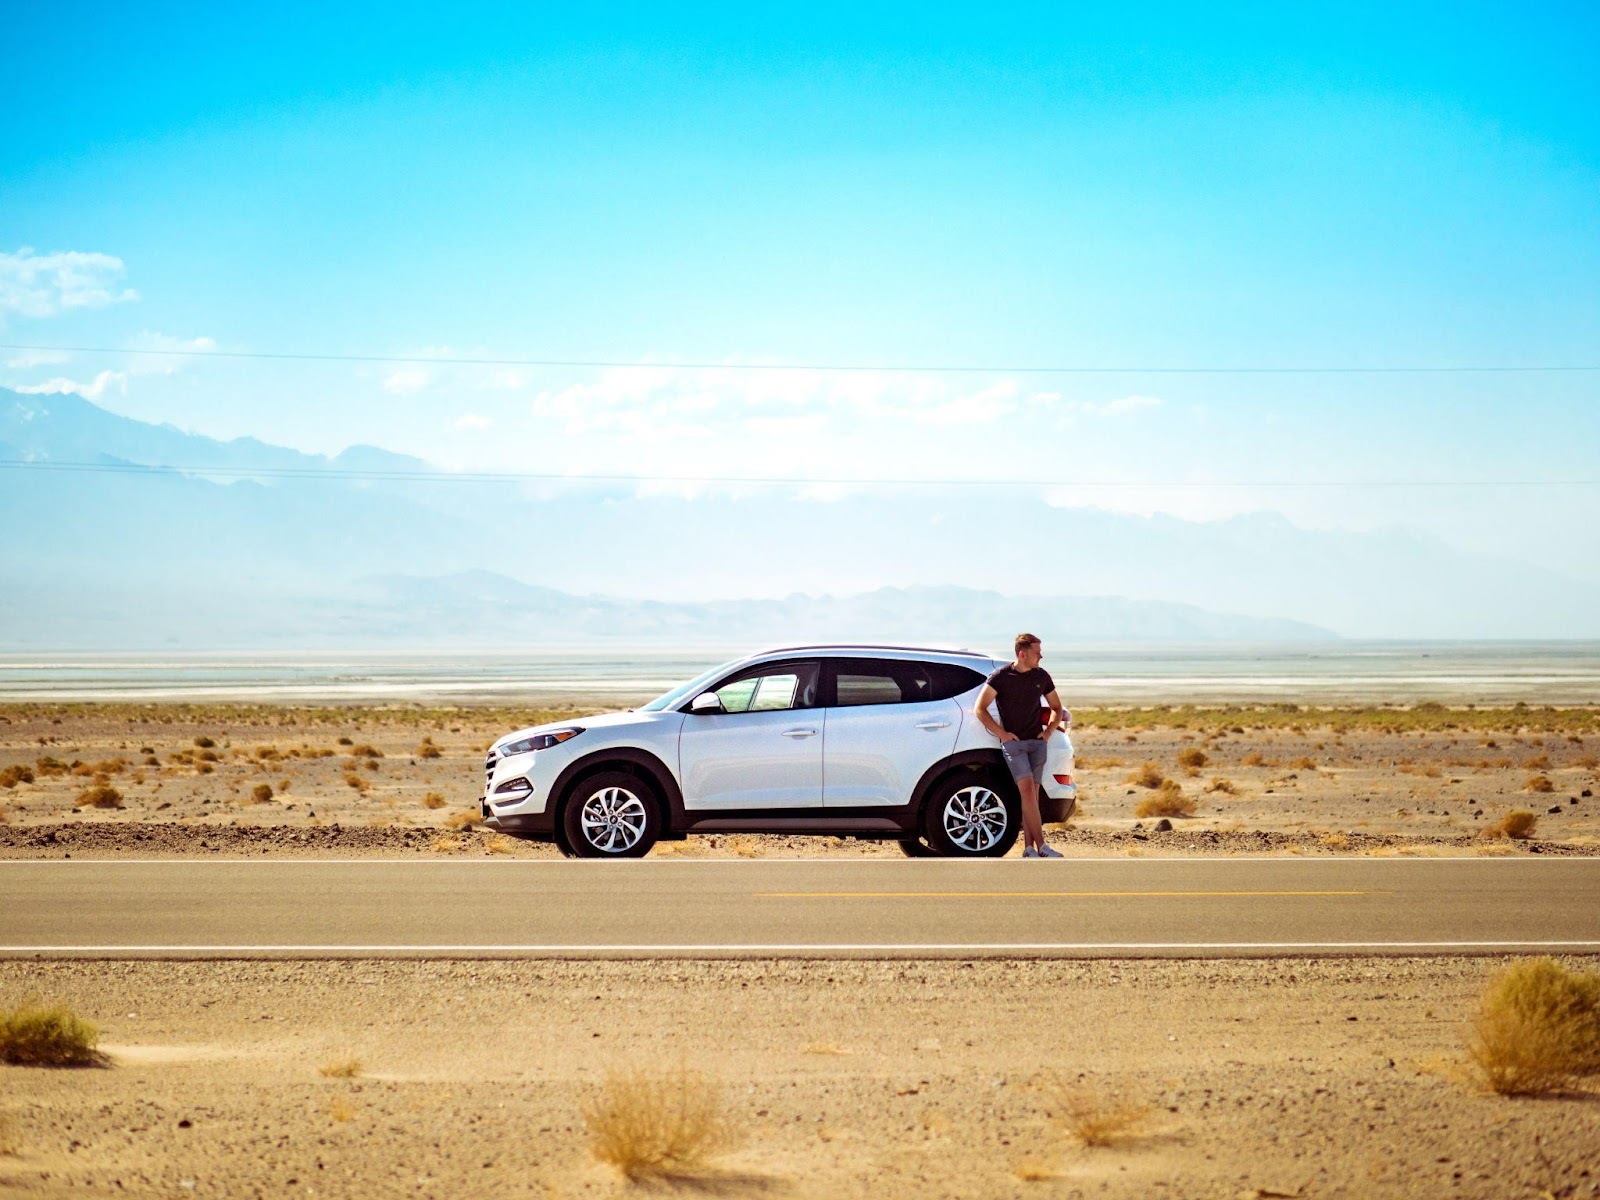 Ensure an Unforgettable Road Trip Experience